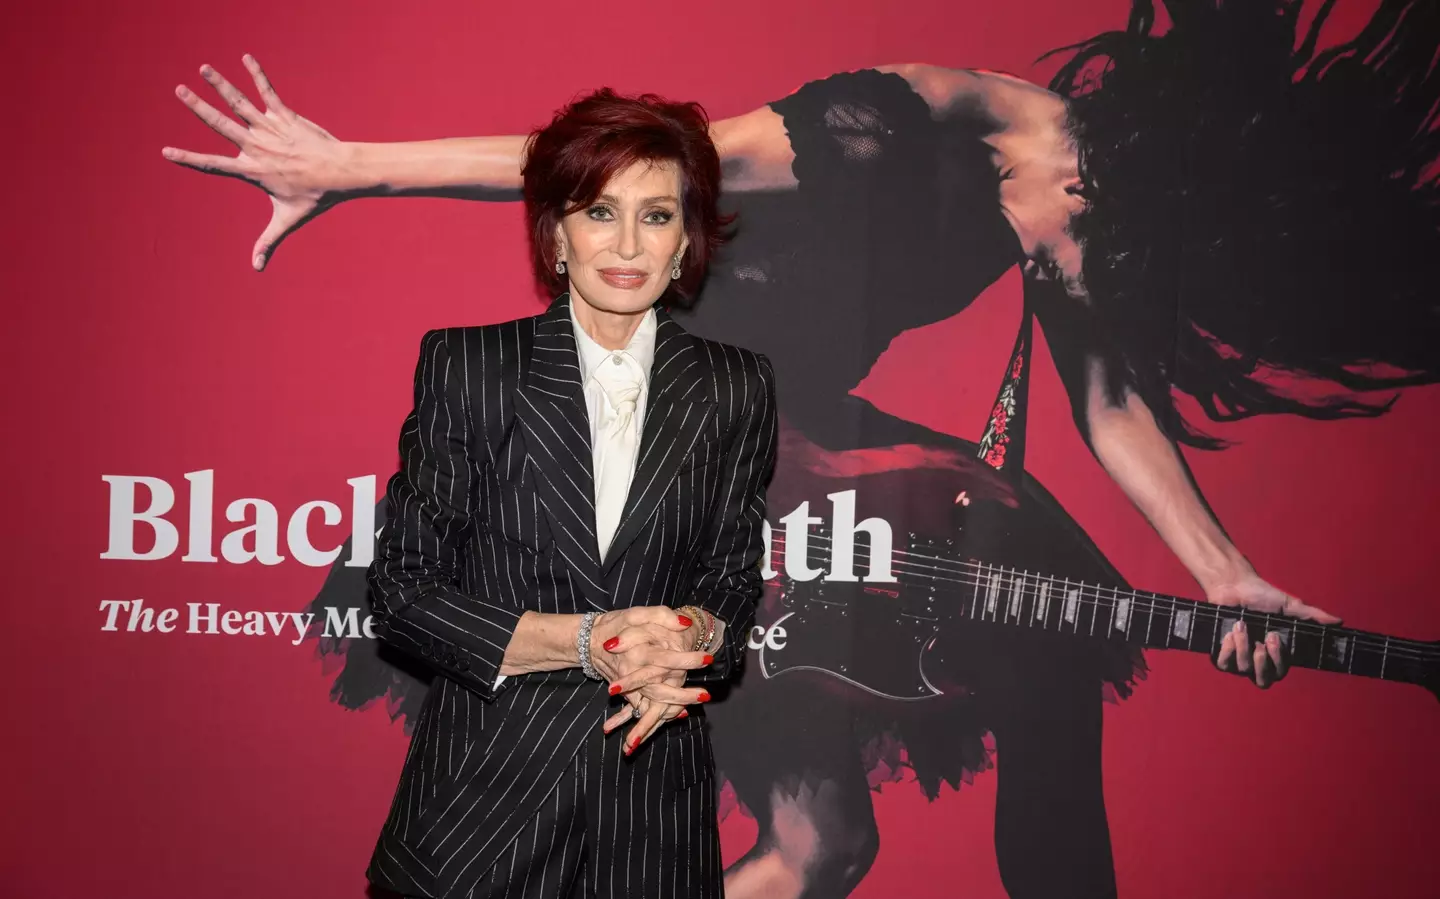 Sharon Osbourne opened up about her weekly diet following a dramatic weight loss.